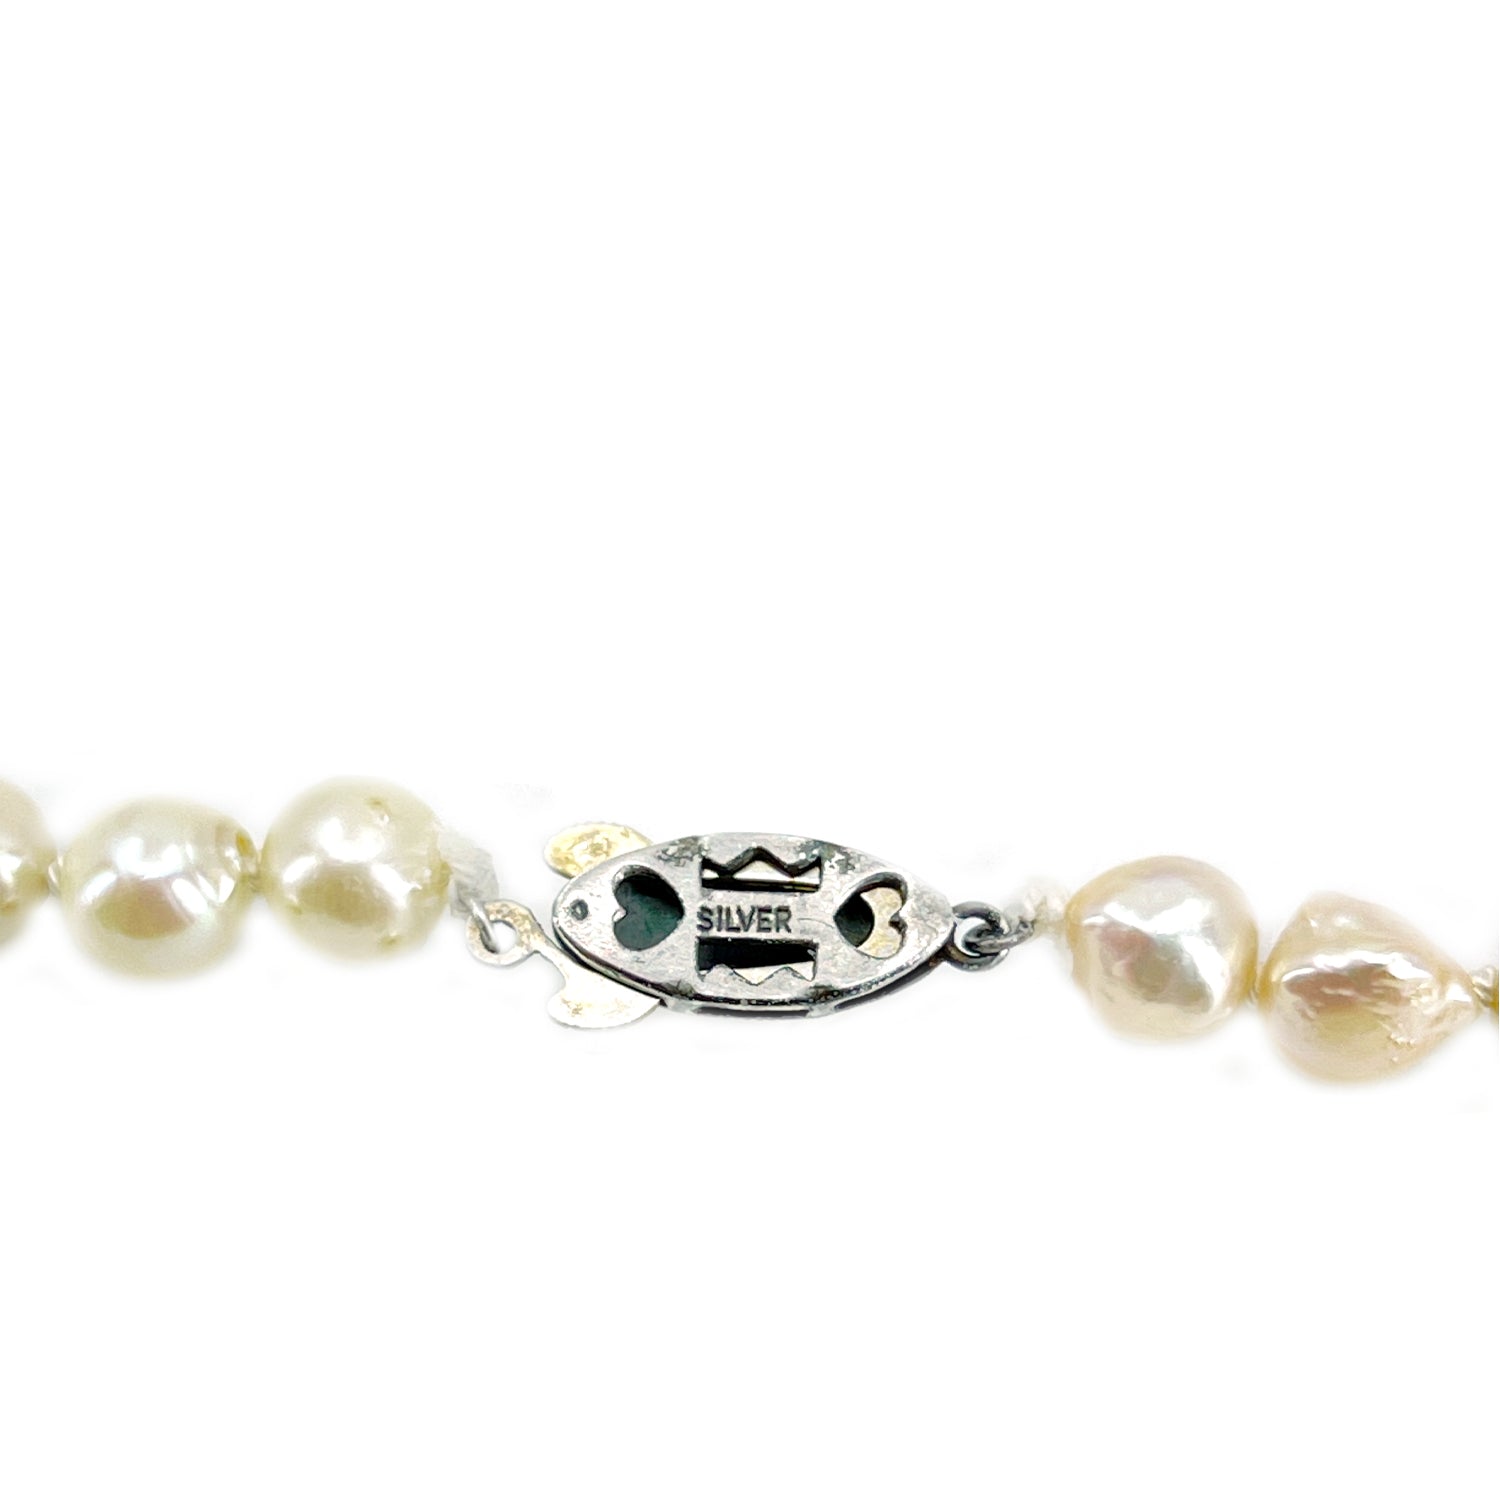 Baroque Deco Japanese Saltwater Cultured Akoya Pearl Engraved Necklace - Sterling Silver 21 Inch